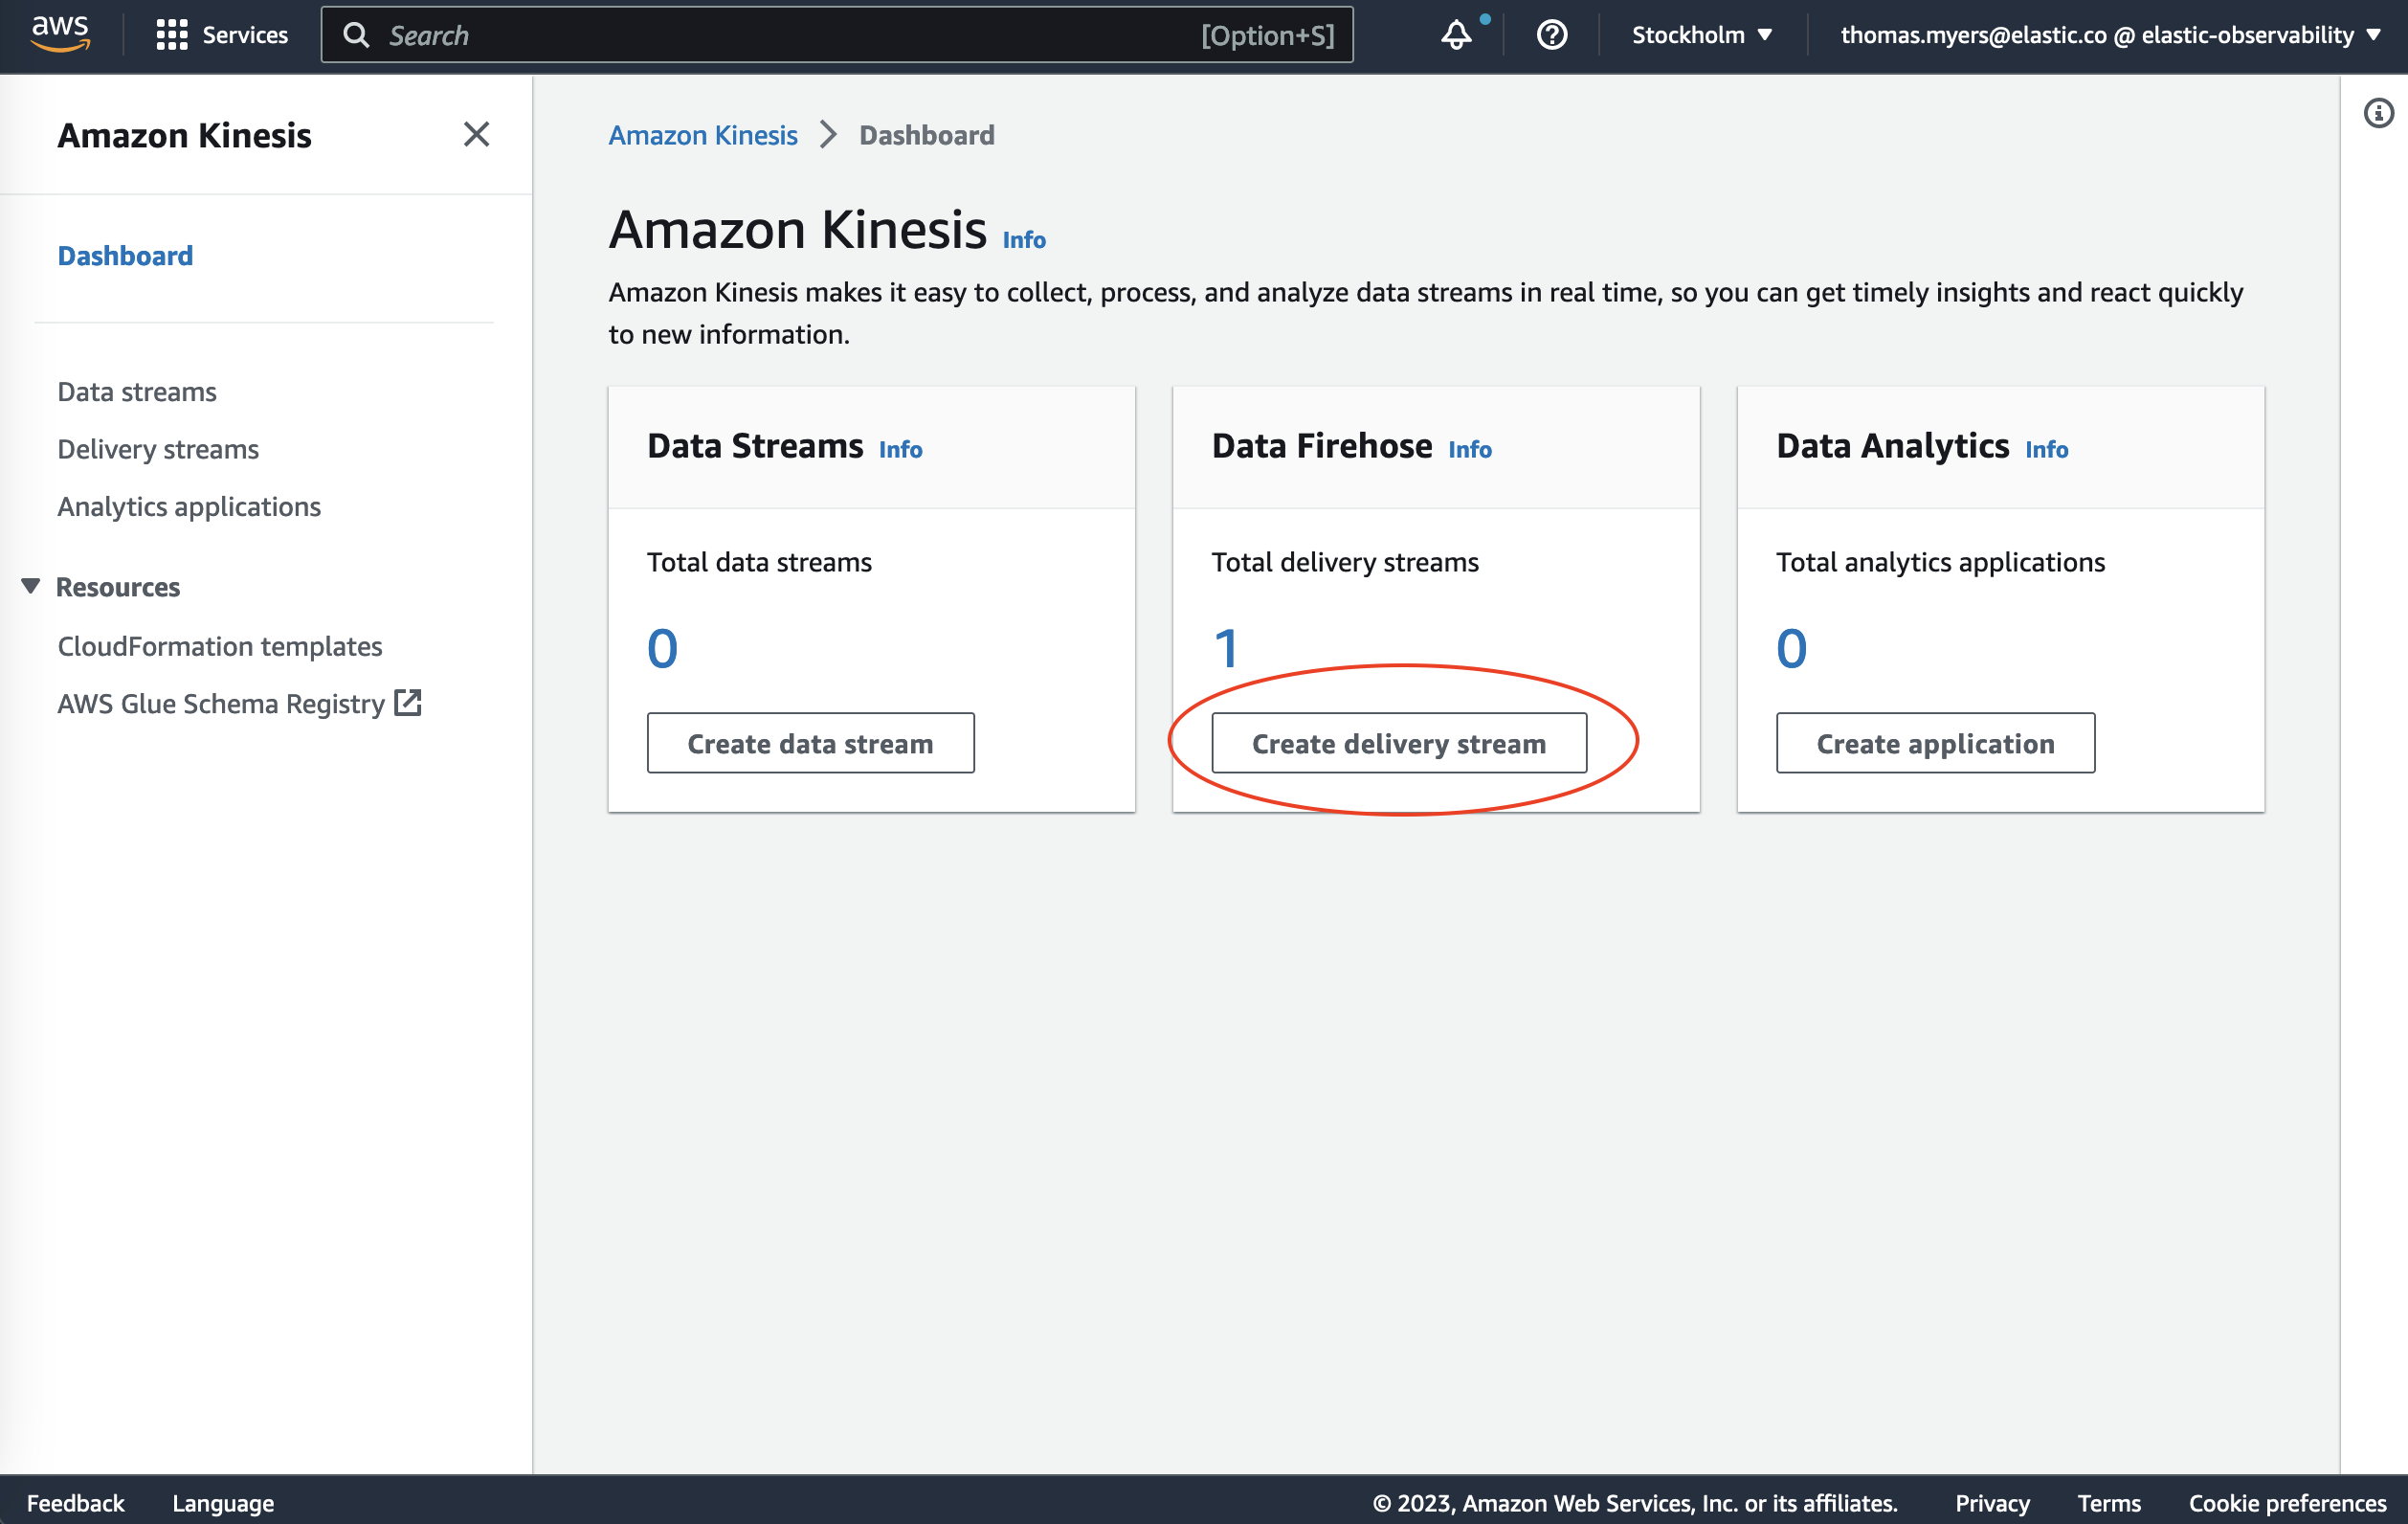 Amazon Kinesis dashboard with the "Create delivery stream" button highlighted